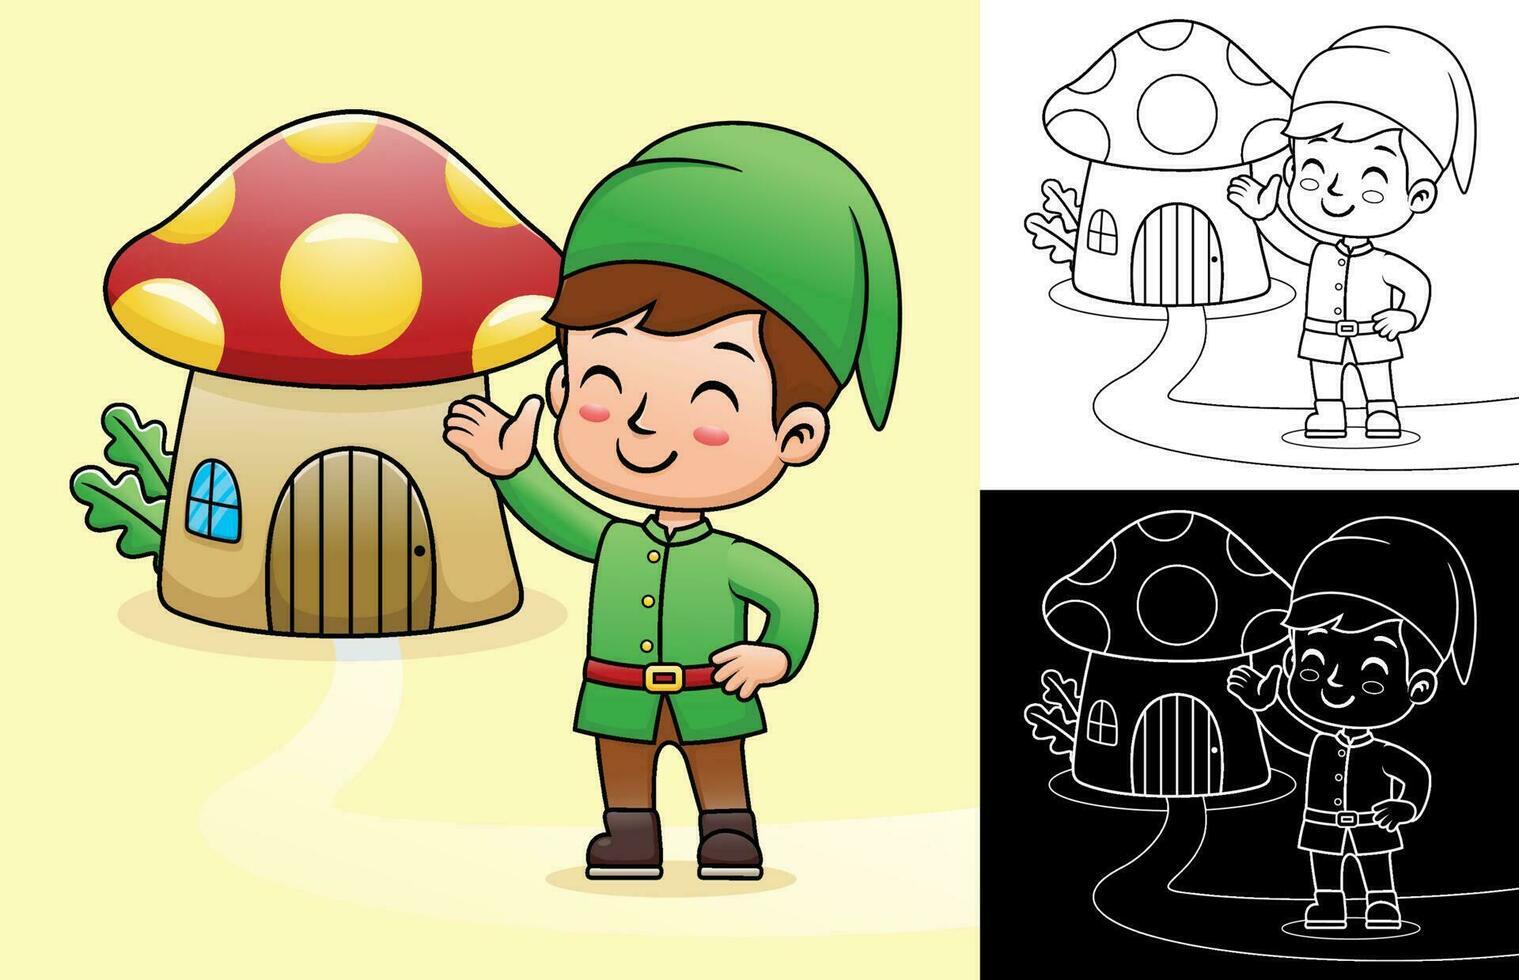 Vector cartoon of boy in elf costume with mushroom house. Coloring book or page